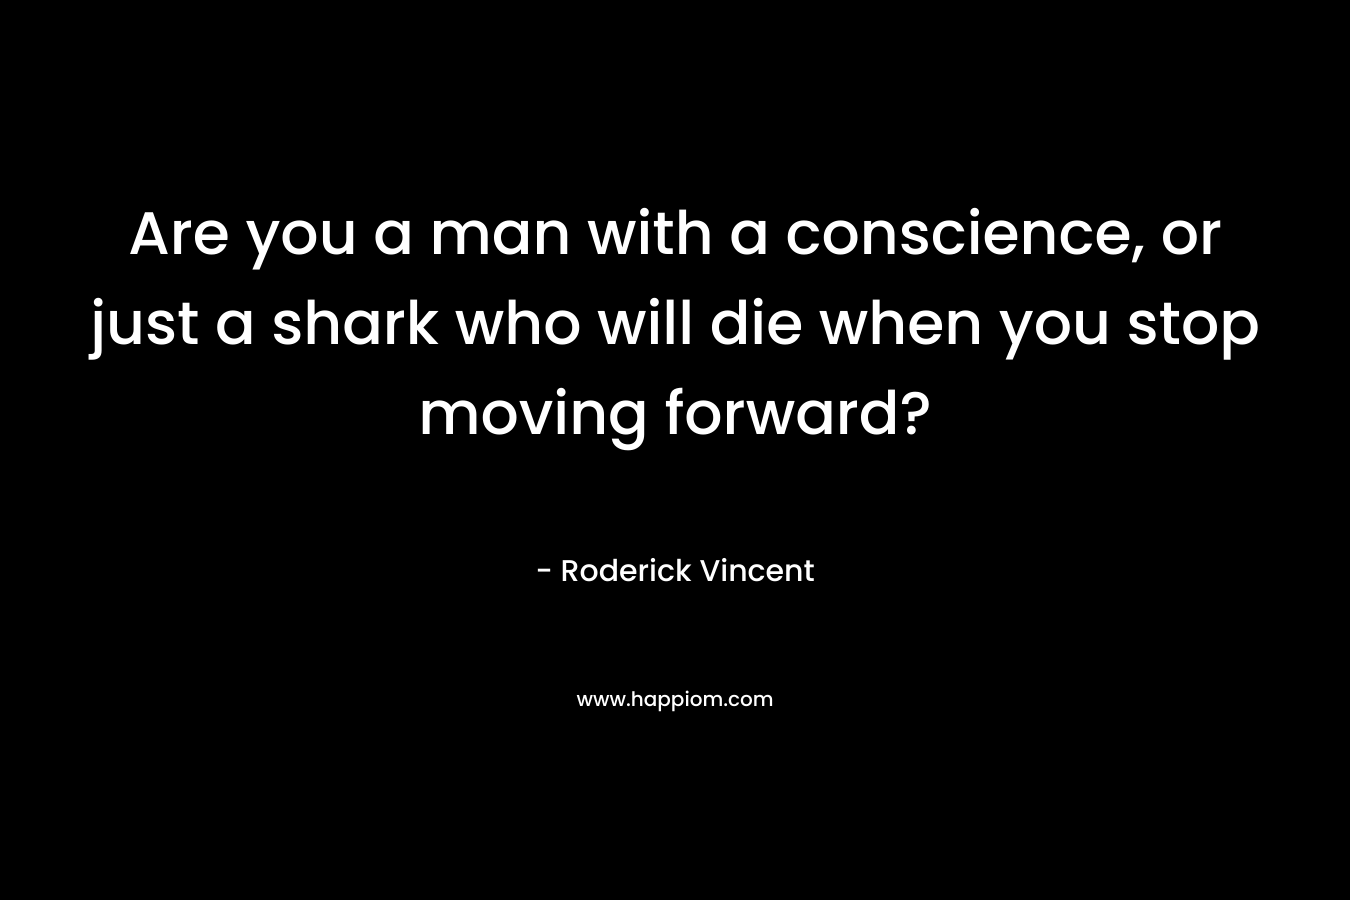 Are you a man with a conscience, or just a shark who will die when you stop moving forward? – Roderick Vincent